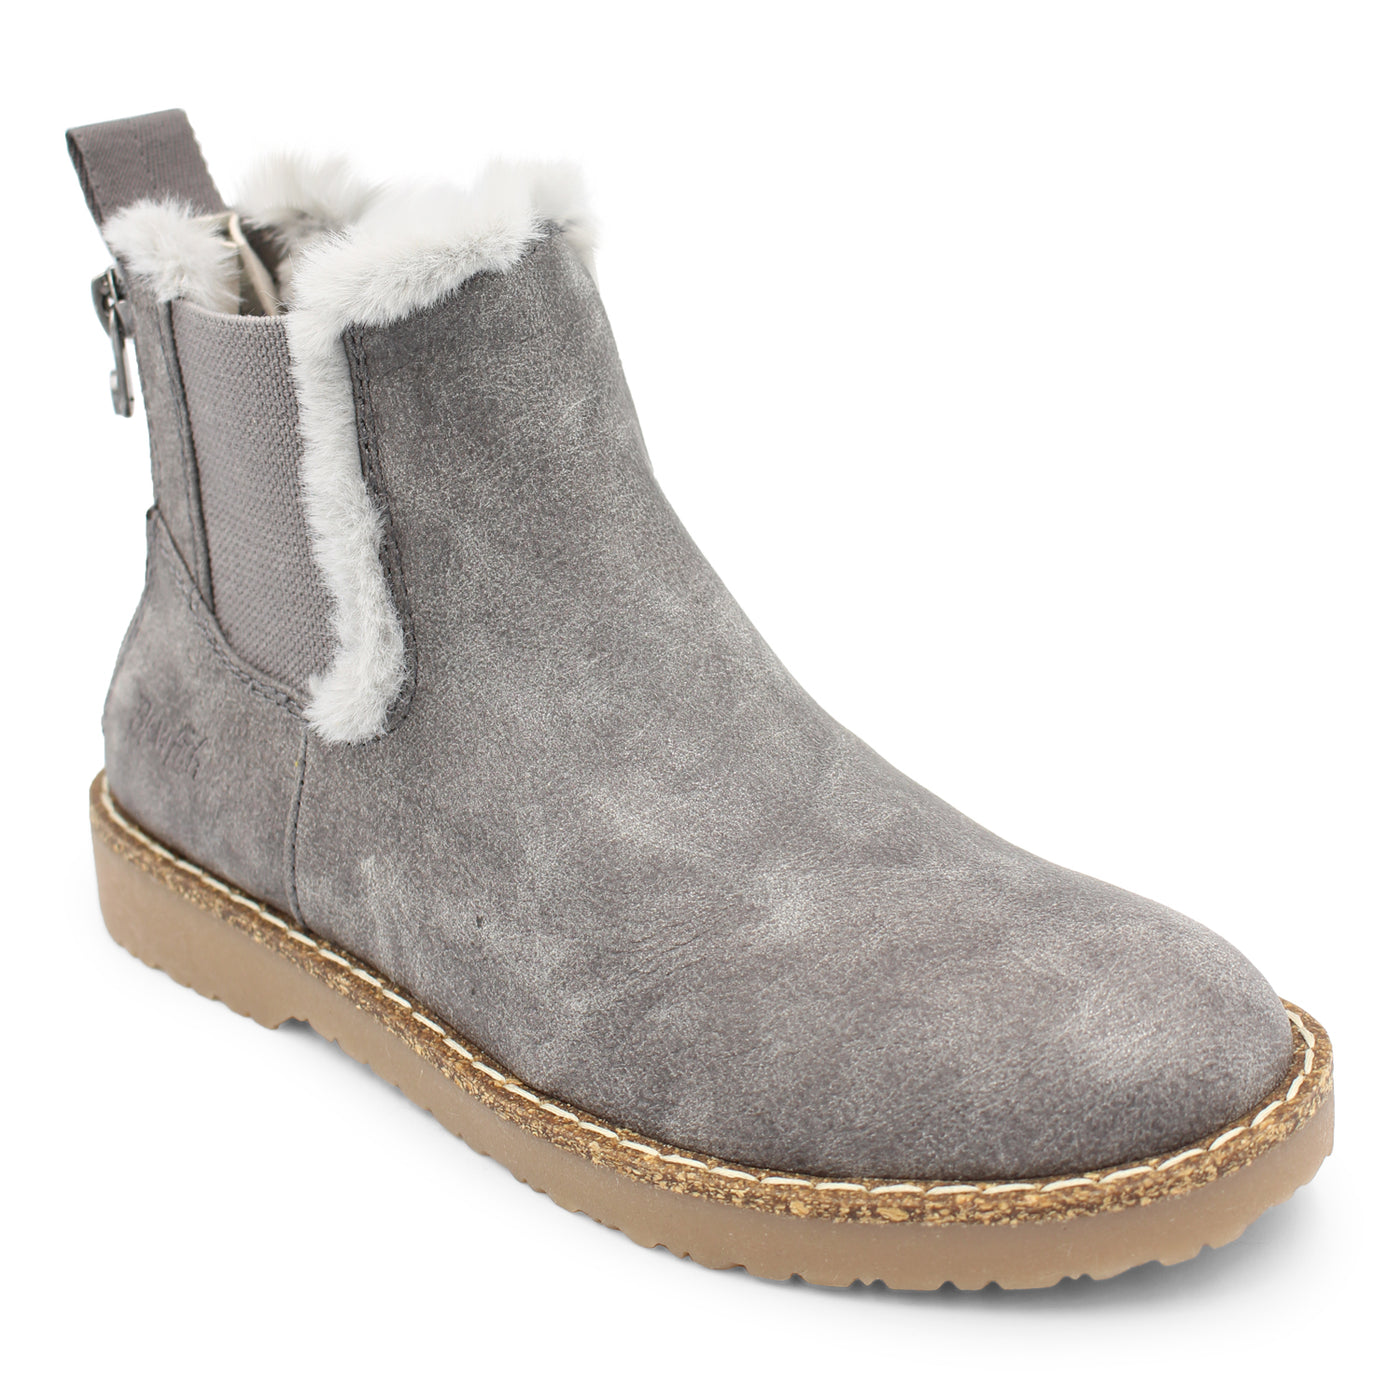 Blowfish Chillin Chelsea Boot - Stone Cattle Drive - PLEASE CALL FOR SIZE AVAILABILITY